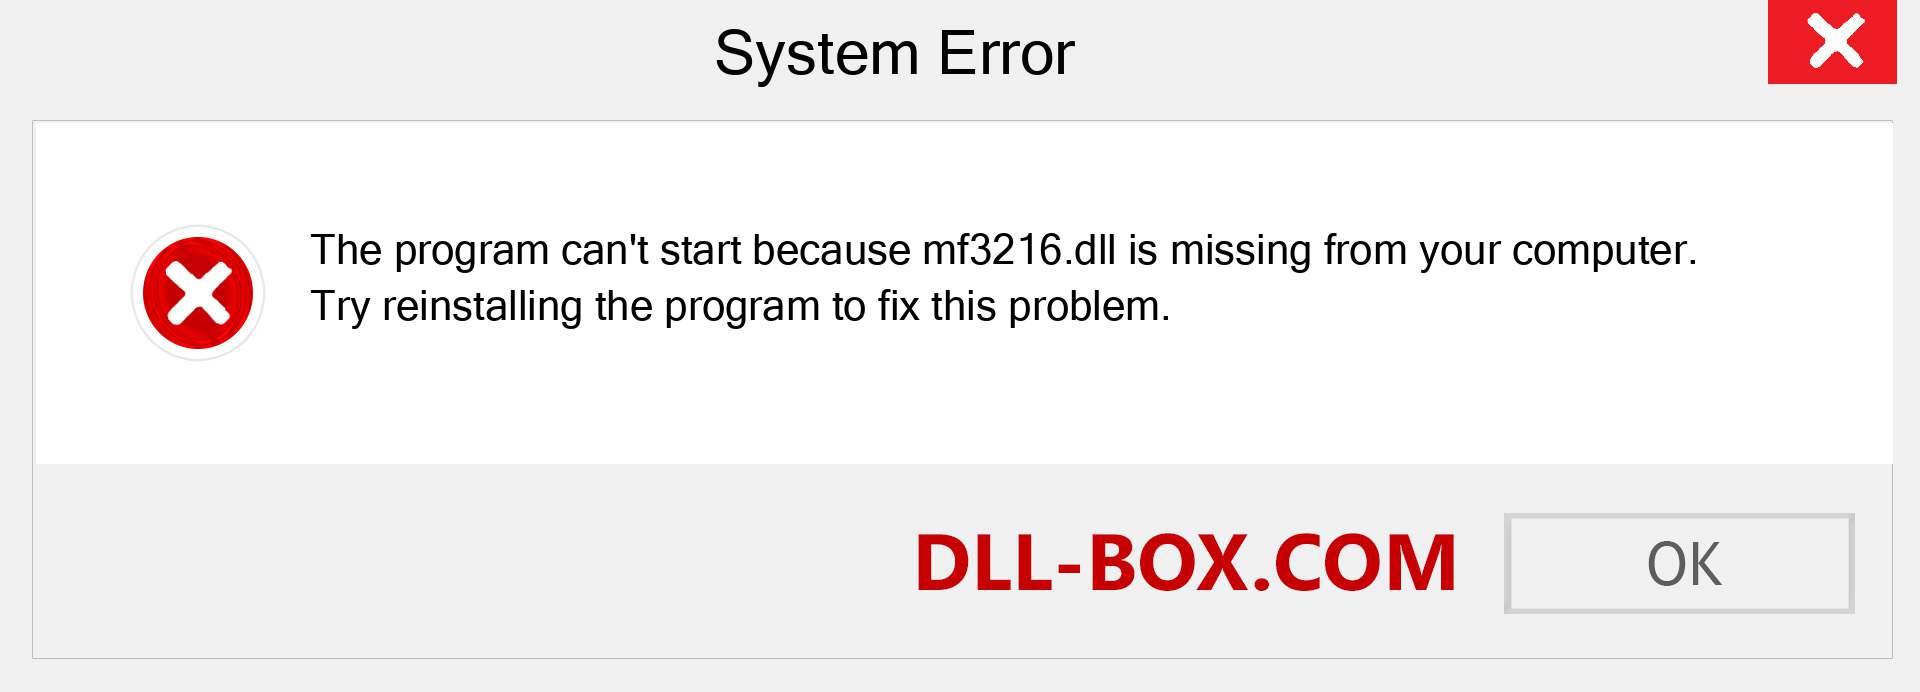  mf3216.dll file is missing?. Download for Windows 7, 8, 10 - Fix  mf3216 dll Missing Error on Windows, photos, images